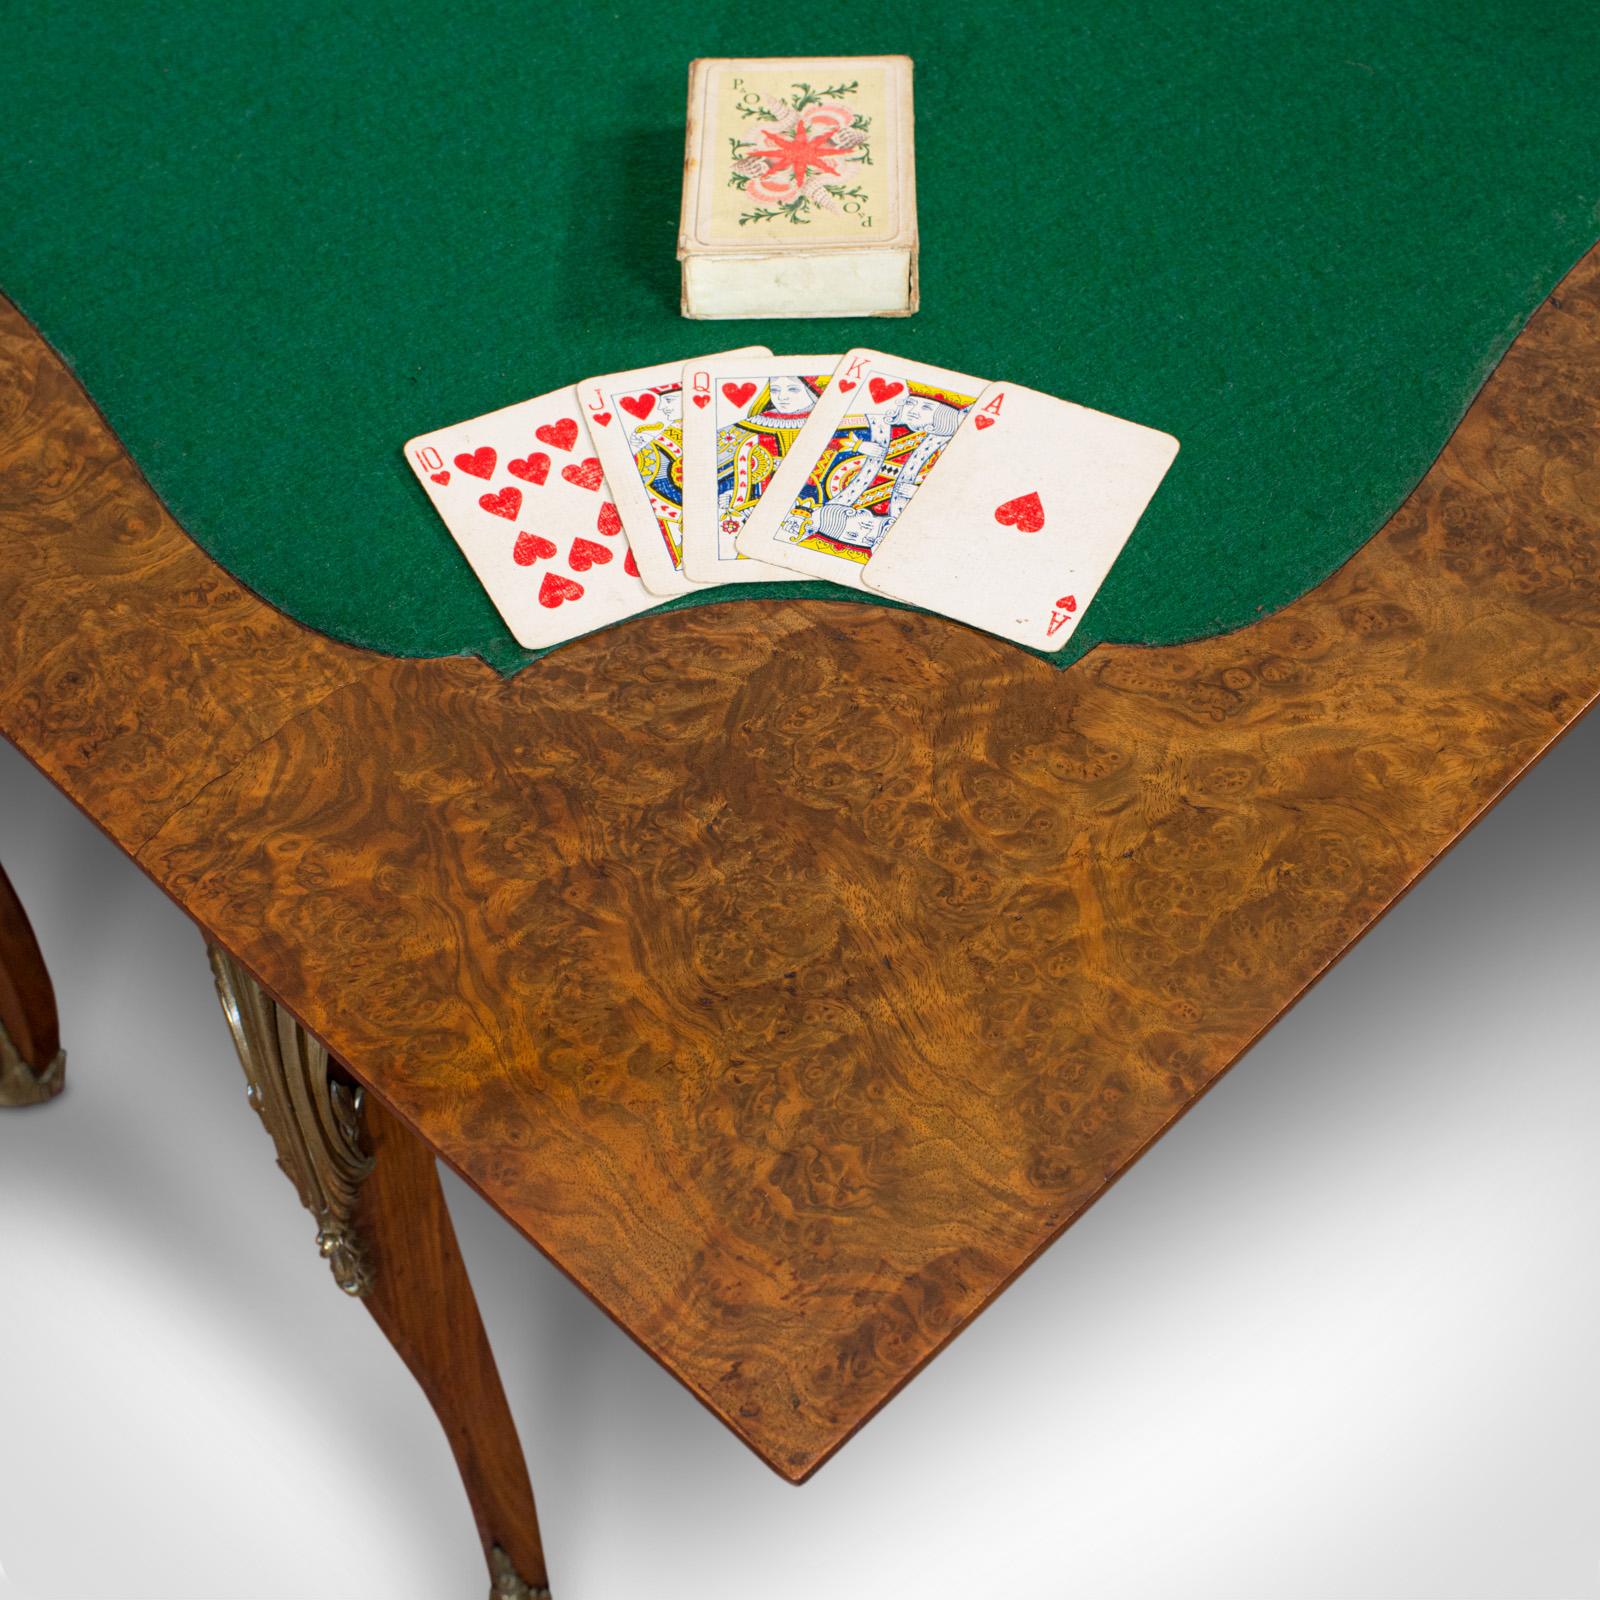 Antique Card Table, French, Burr Walnut, Fold over, Games, Victorian, circa 1870 For Sale 2